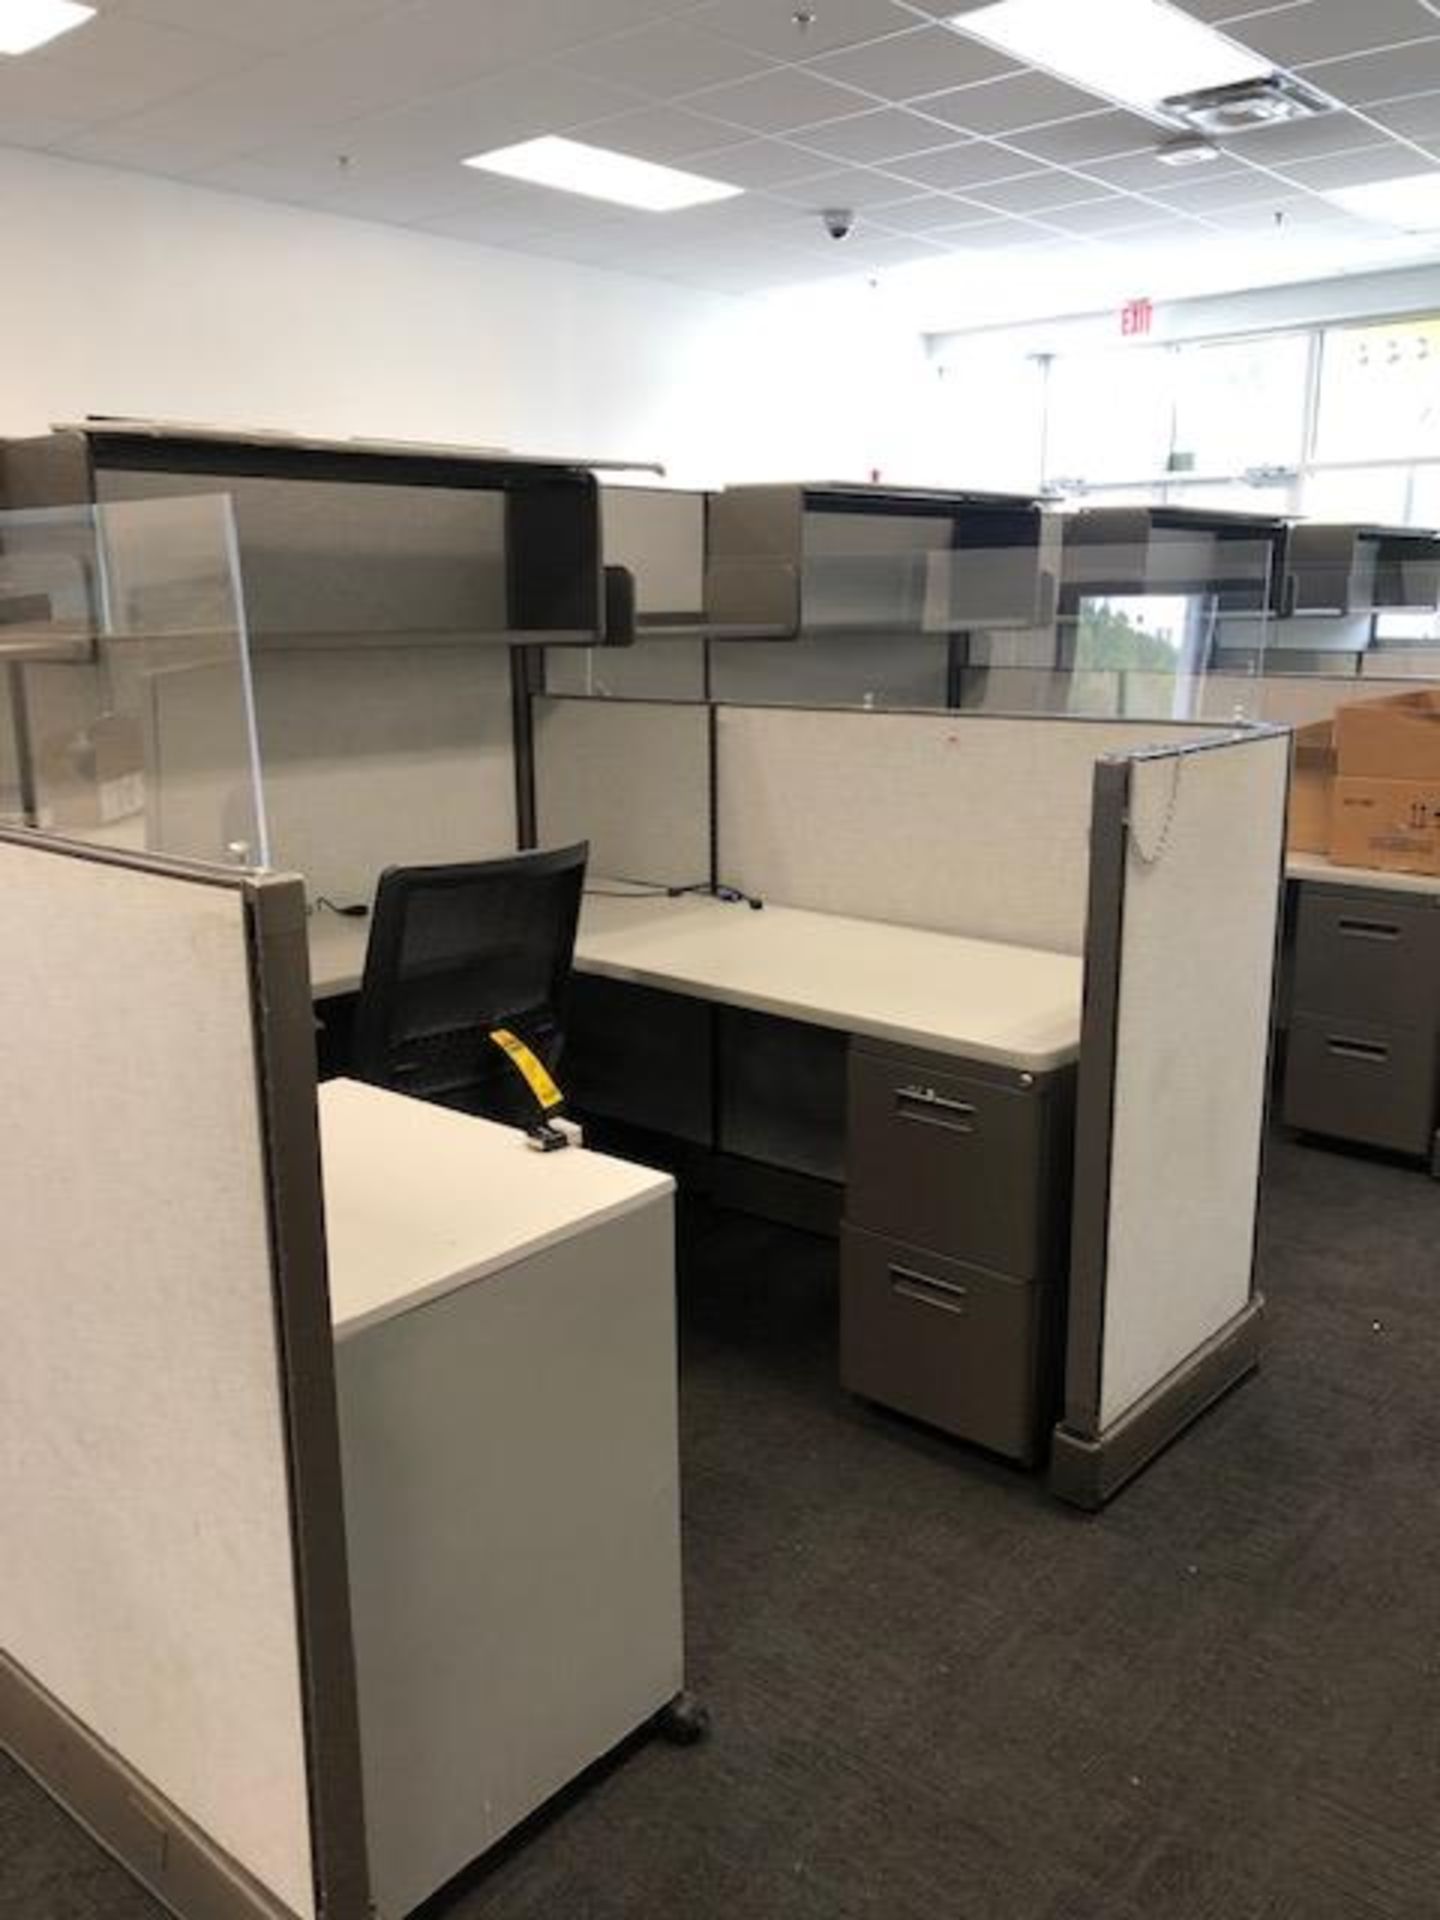 LOT OF CUBICLES AND CHAIRS